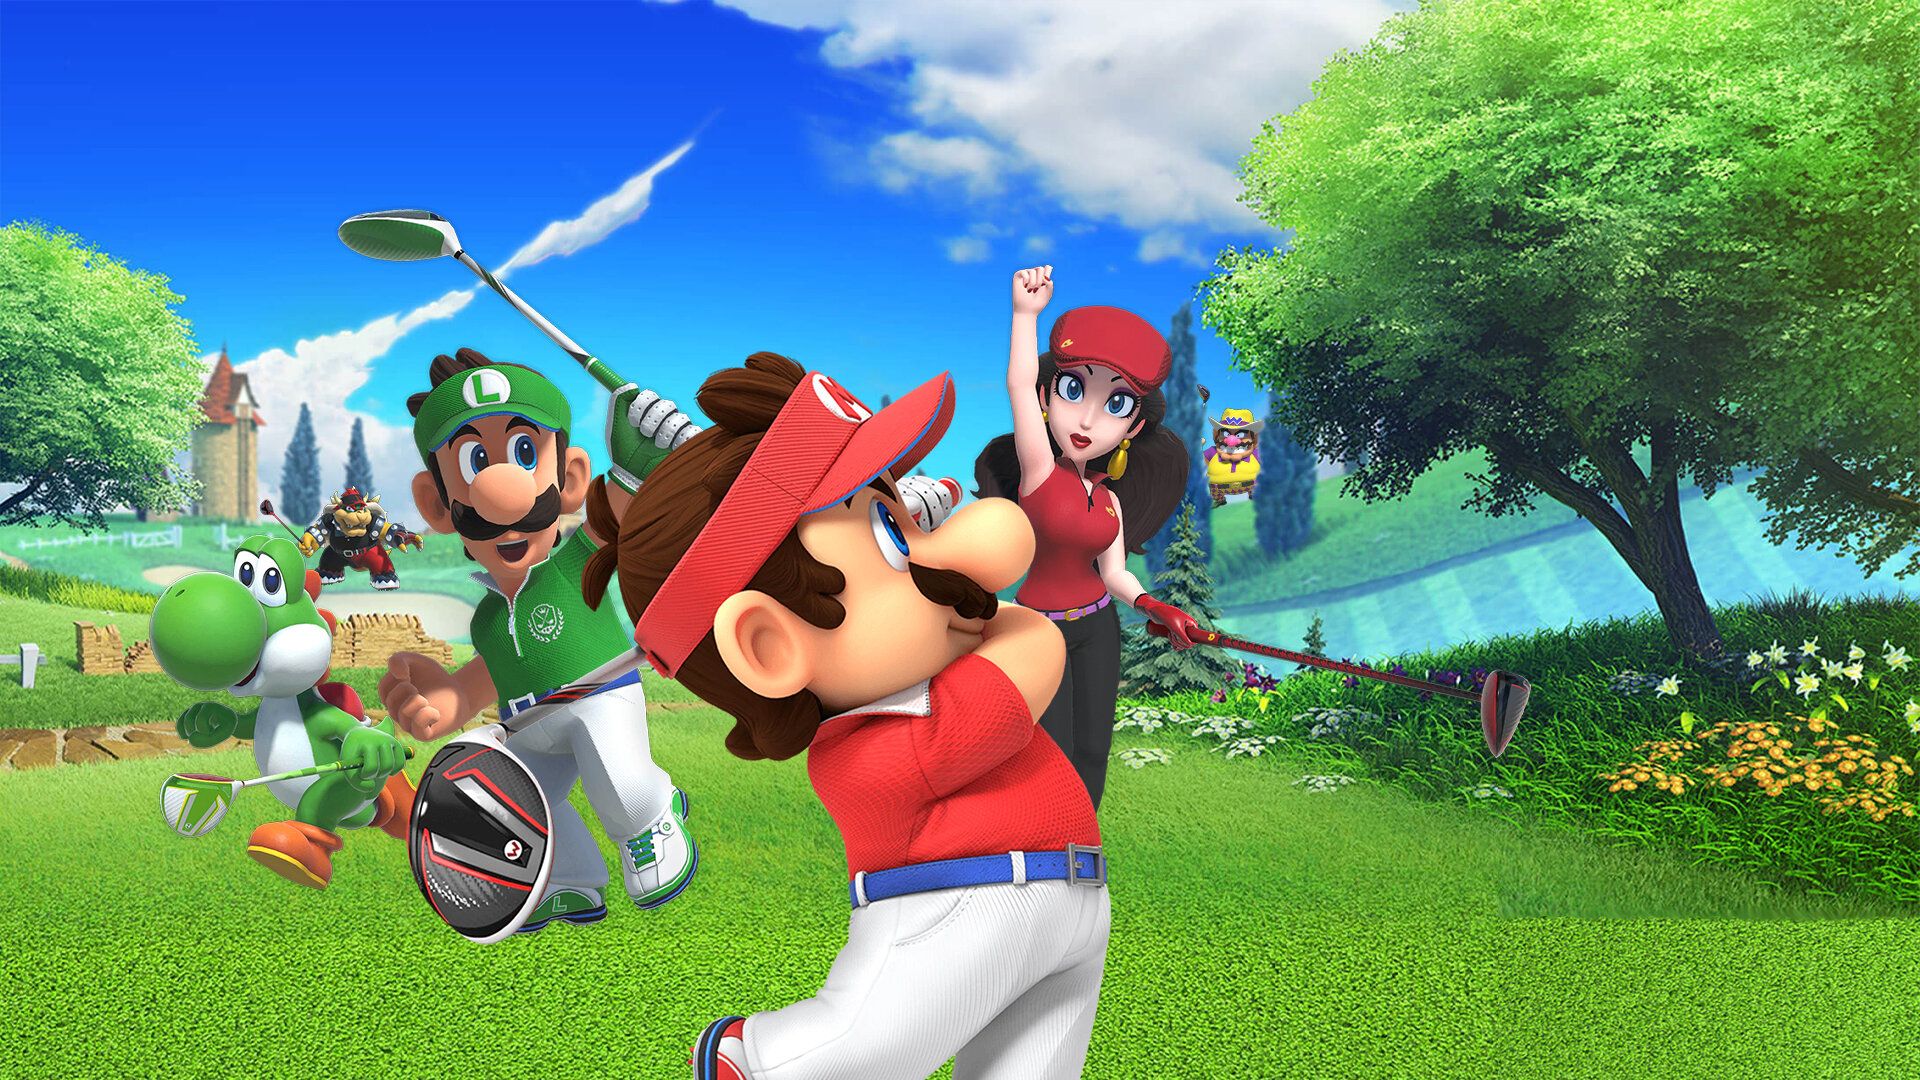 Mario Golf Super Rush gets a new overview trailer, that debuts new characters and modes